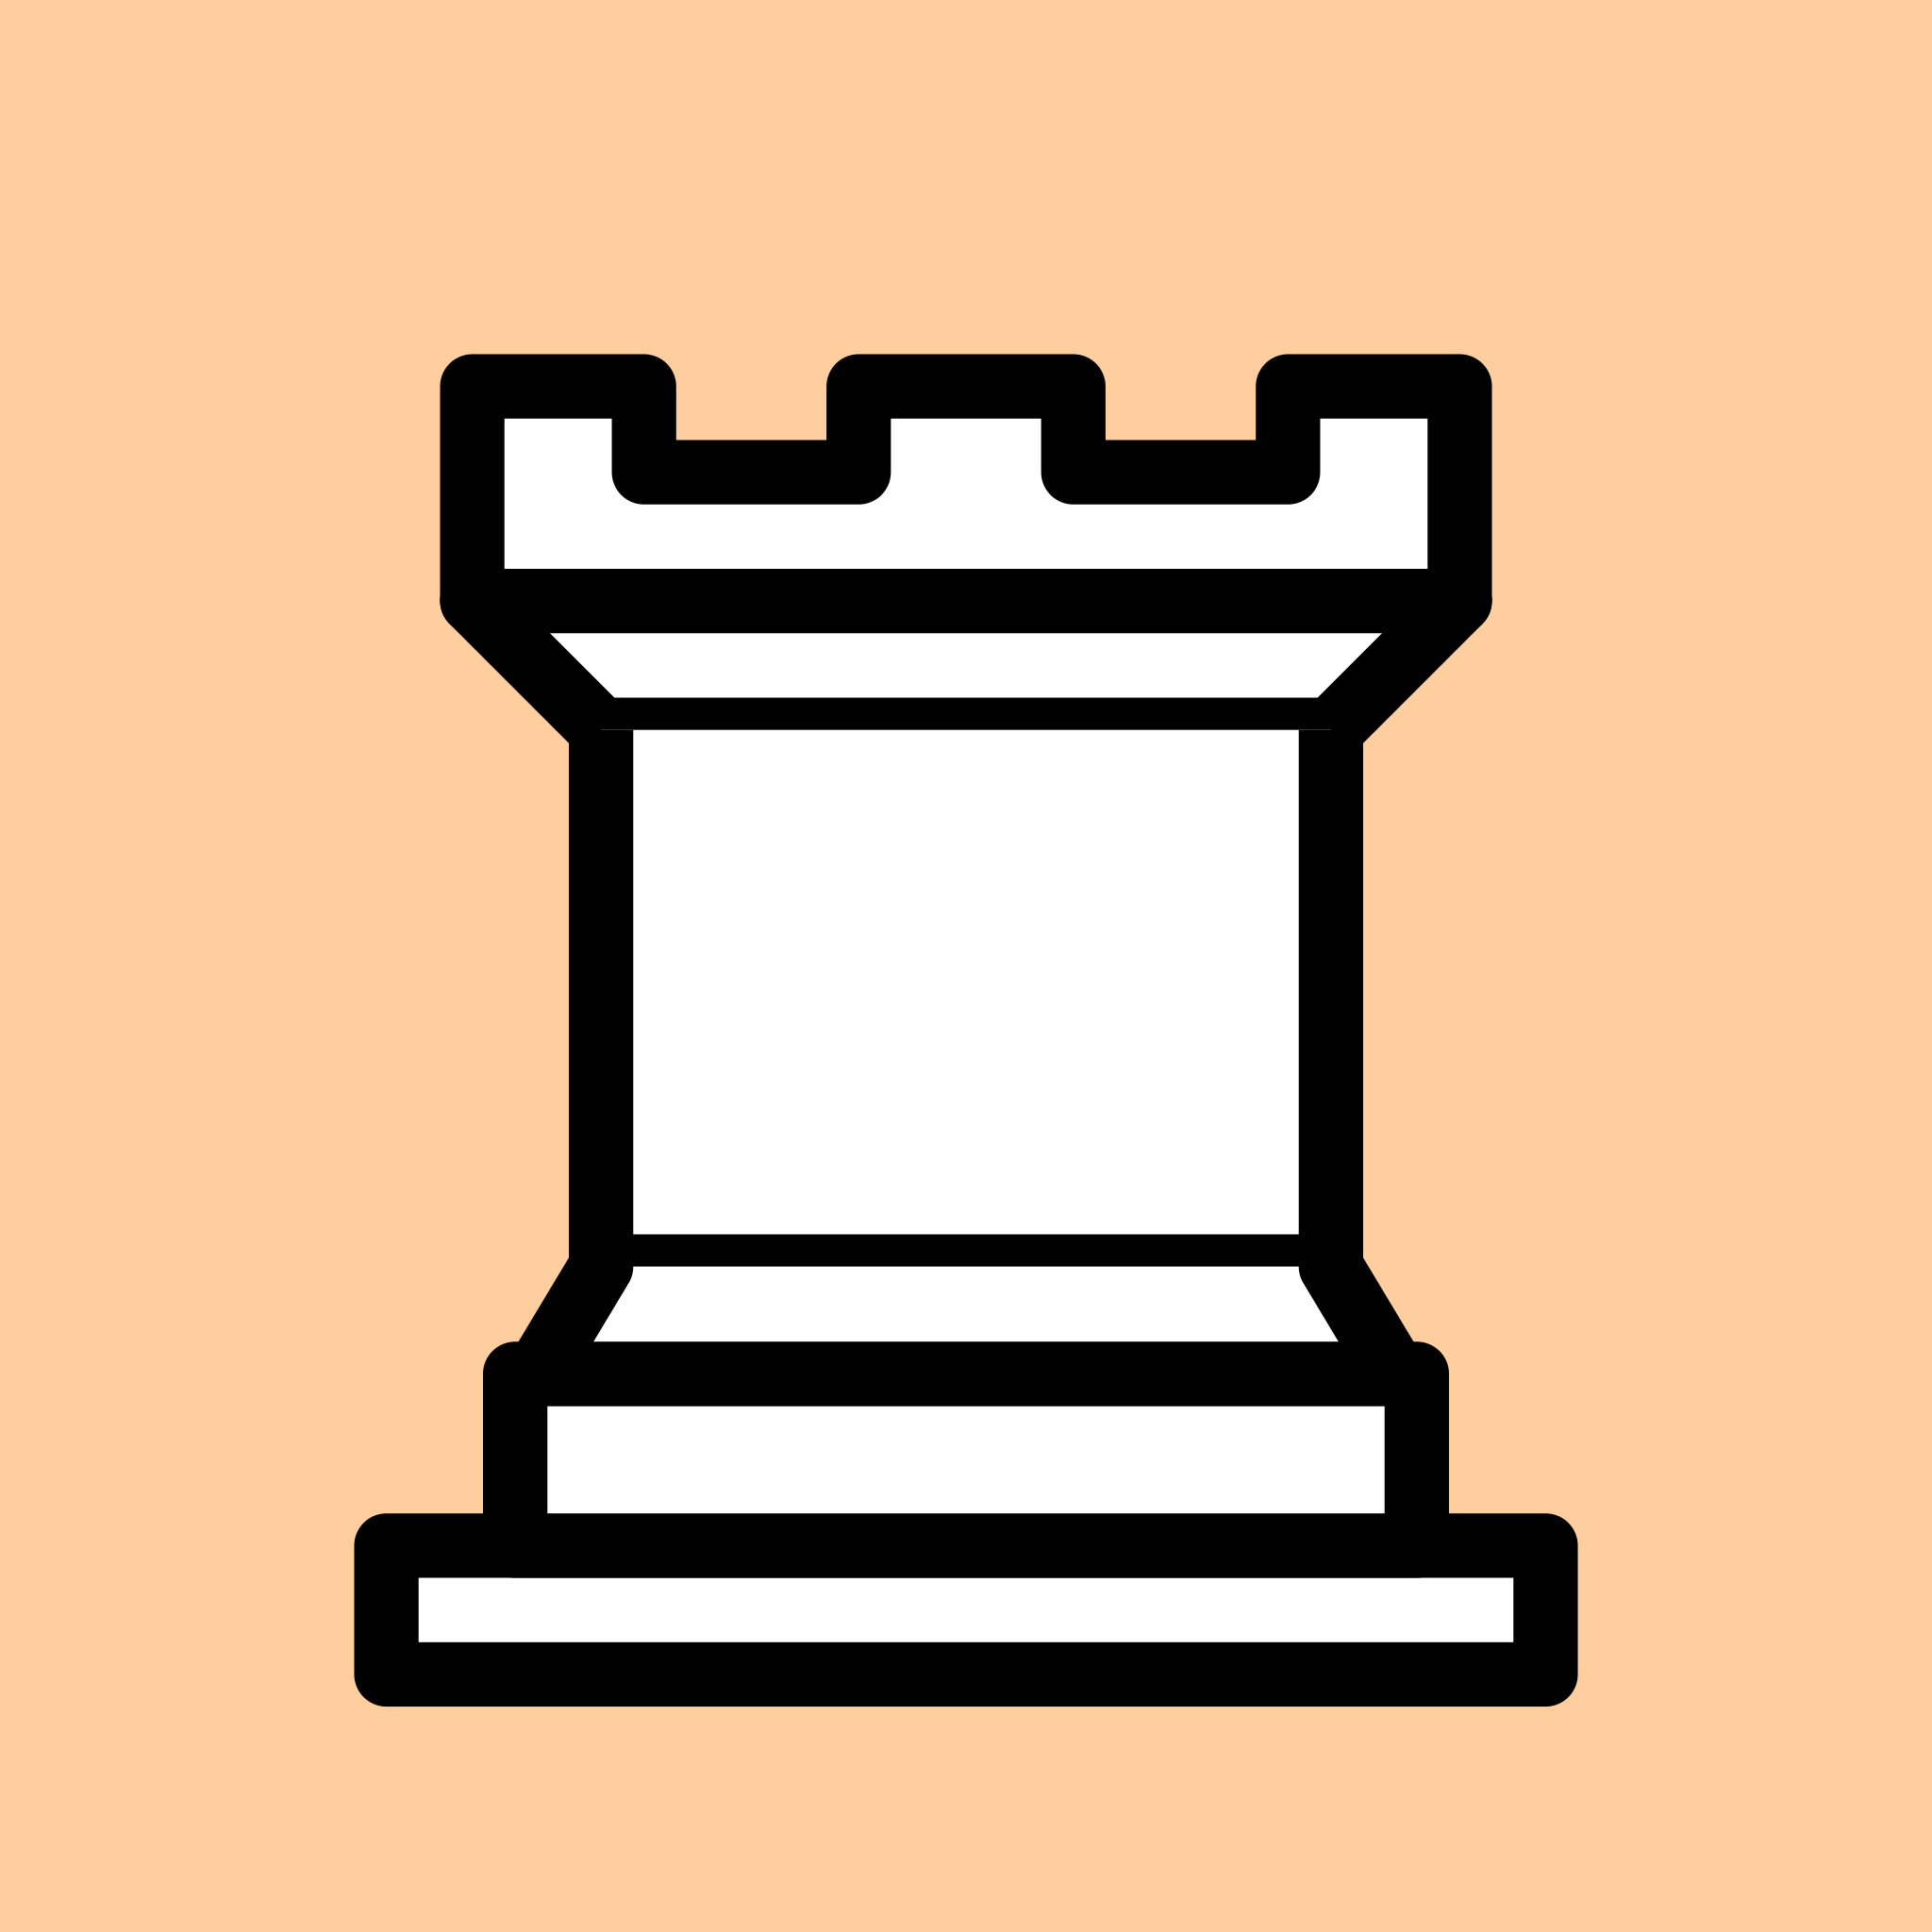 File:Chess pieces and board improved.svg - Wikimedia Commons